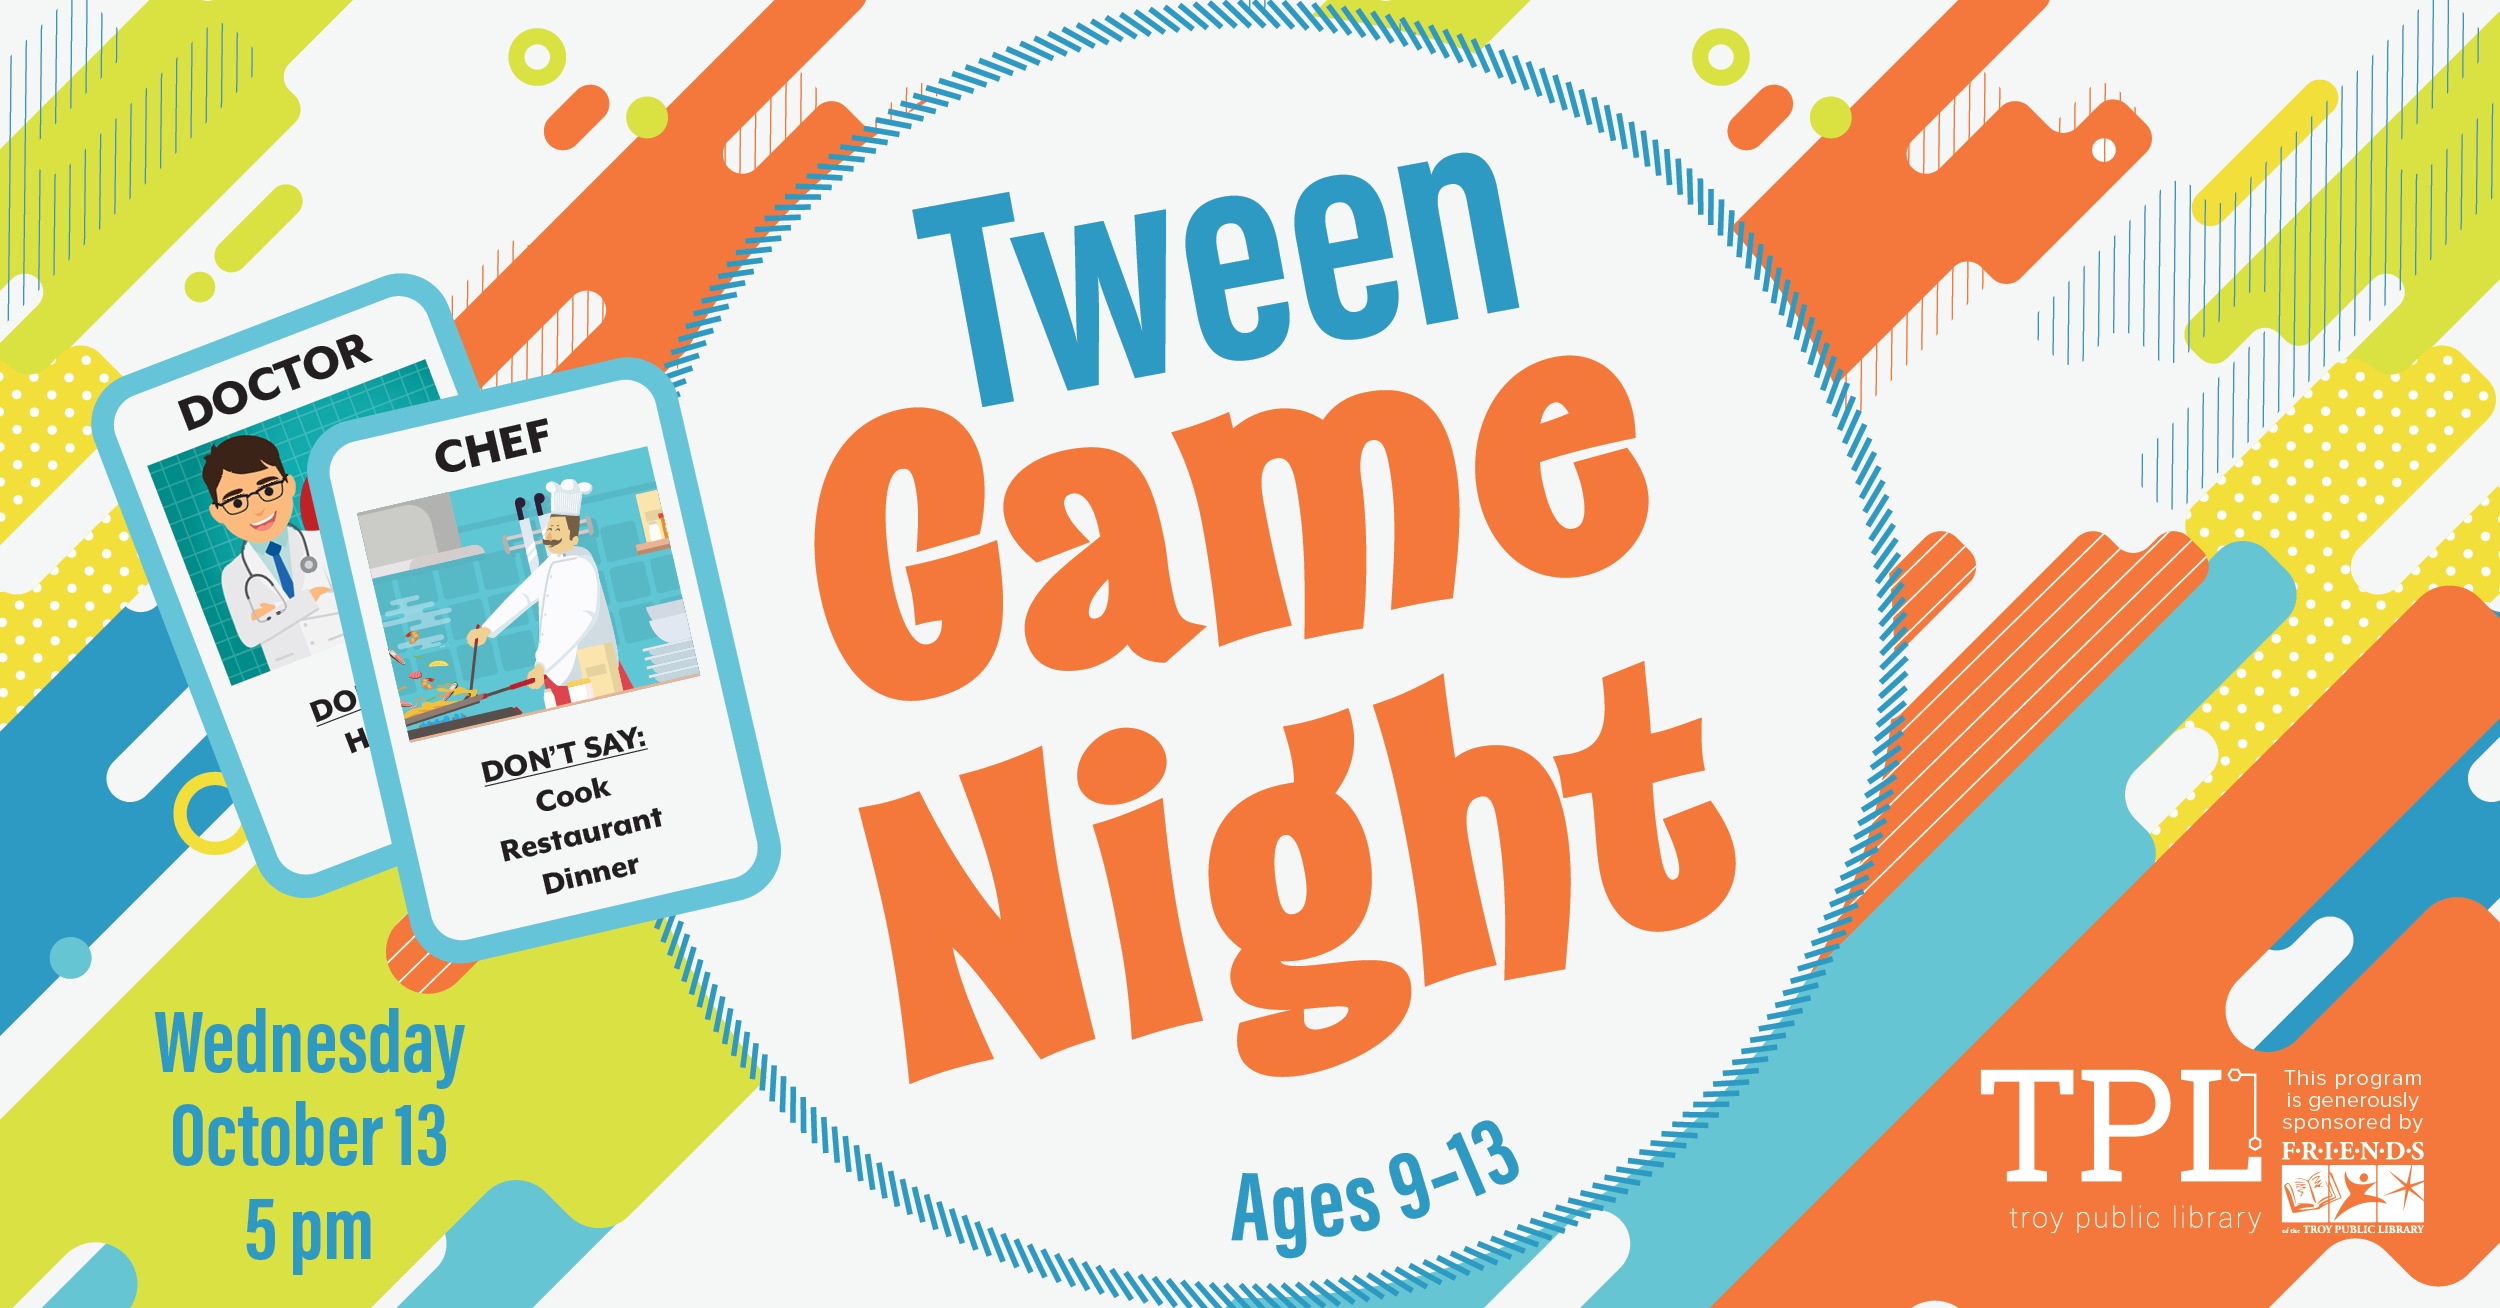 Tween Game Night Wednesday, October 13 at 5pm. Ages 9-13. Sponsored by the Friends of the Troy Public Library.